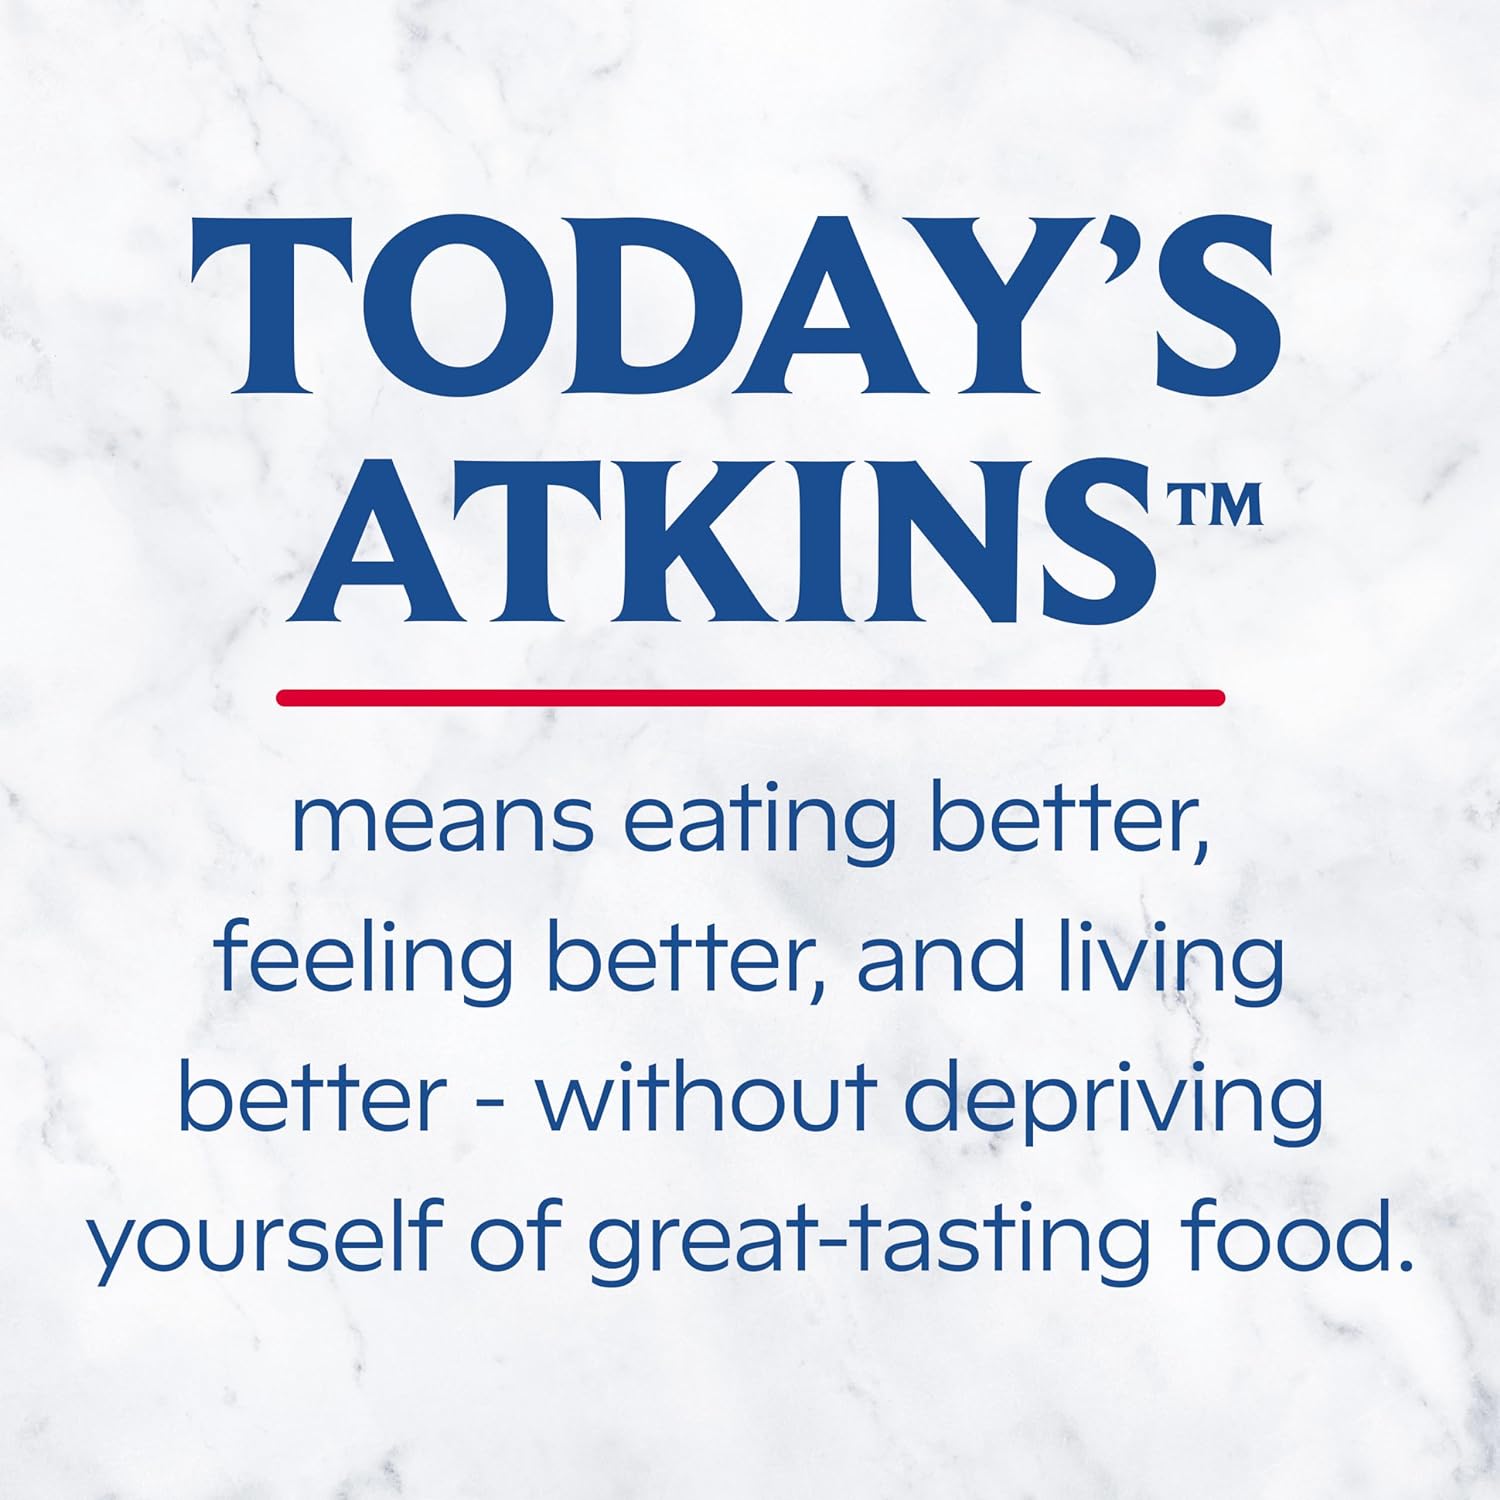 Atkins Iced Tea Latte Protein Shake, Black Tea with Honey, 15g Protein, 3g Fiber, 1g Sugar, Made with Real Tea, 12 Shakes : Health & Household